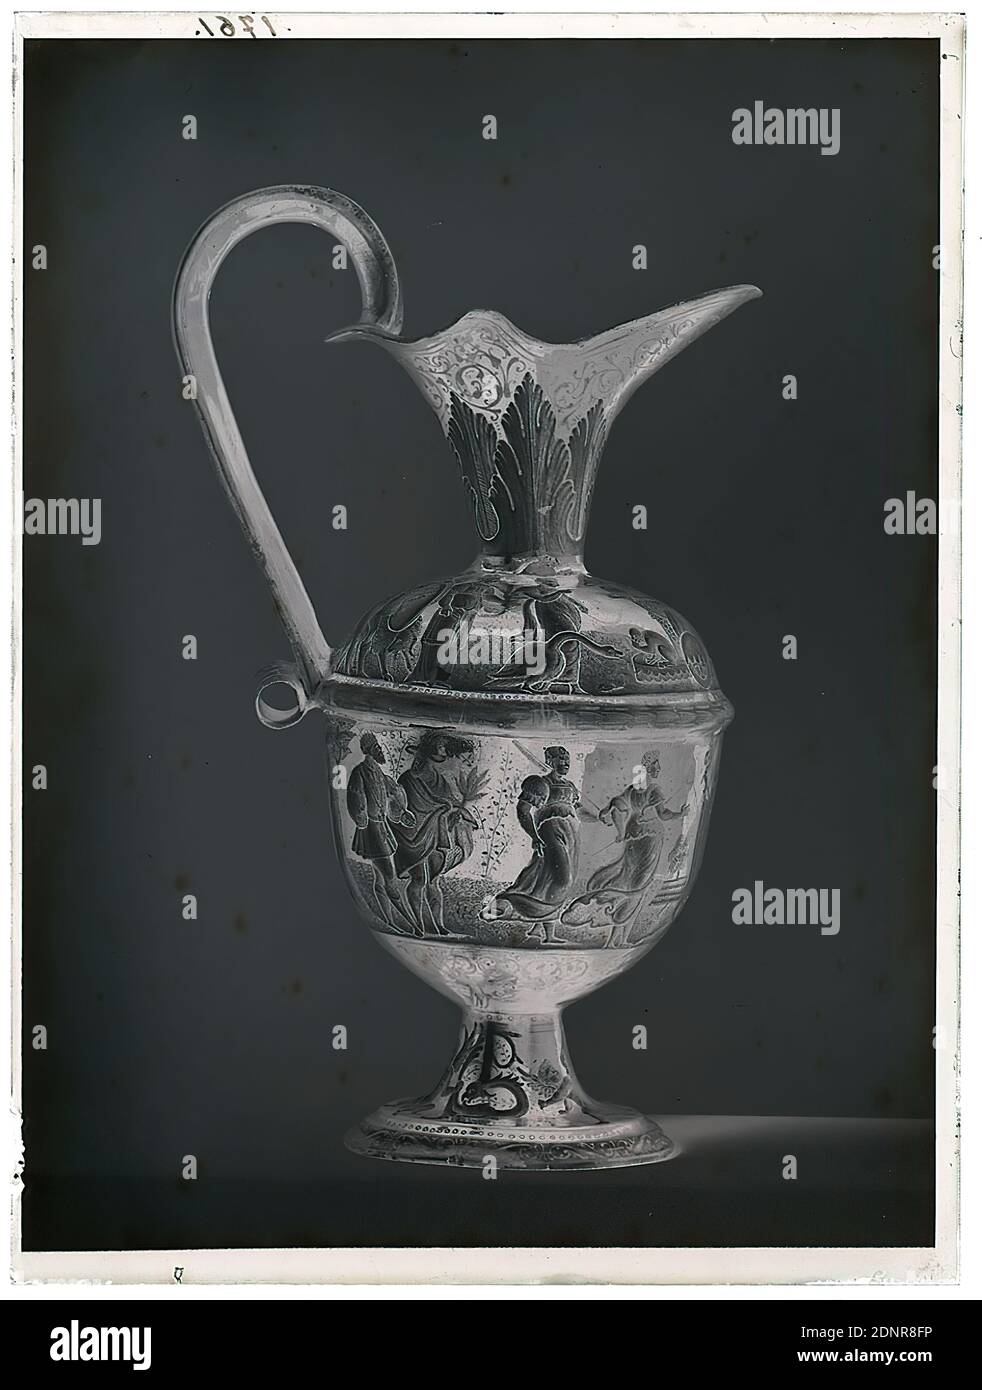 Wilhelm Weimar, enamel jug, glass negative, black and white negative process, total: height: 23,8 cm; width: 17,8 cm, numbered: top left: in black ink: 1761, handicraft, arts and crafts, industrial design, jug (drinking vessel), human Body/Figure/Act, ornaments, birds, plant, animal, animals, work of applied art Stock Photo